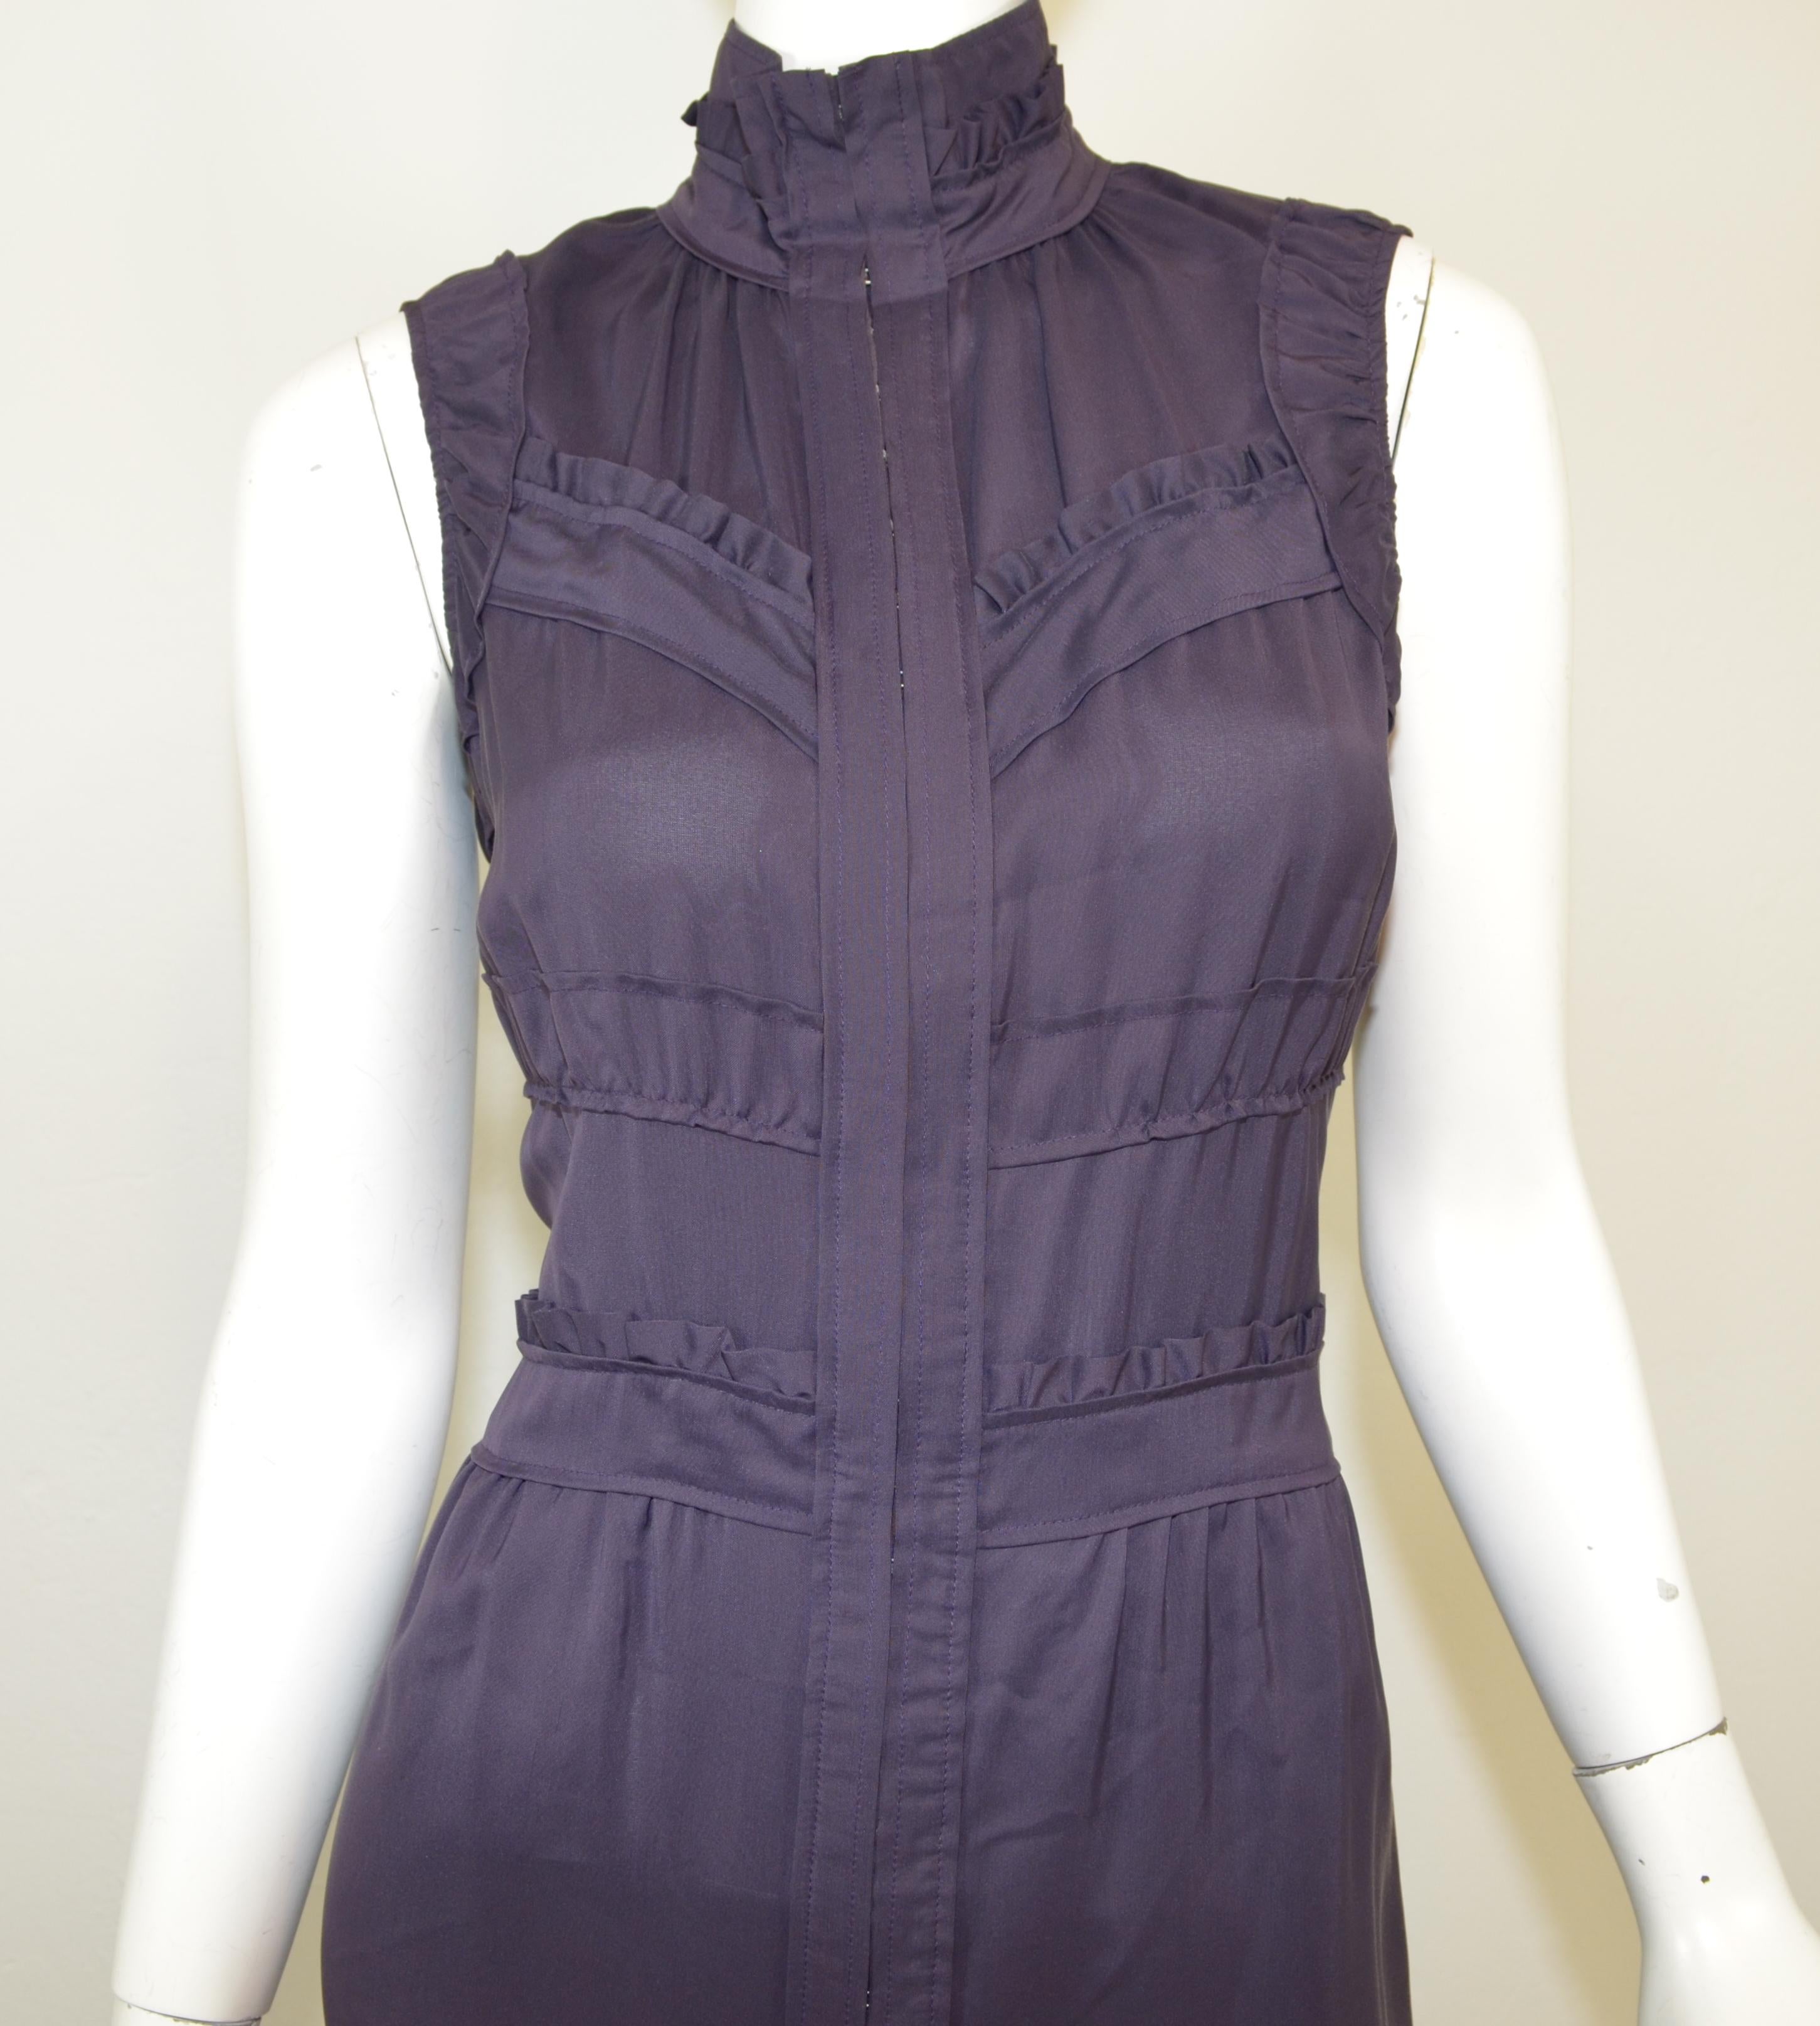 Yves Saint Laurent dress is featured in a dark purple, eggplant color with a mock neckline, ruffle detail trim, pockets at the hips, and hook-and-eye fastenings along the front center. Dress is composed with a silk and viscose blend, size 40, and is